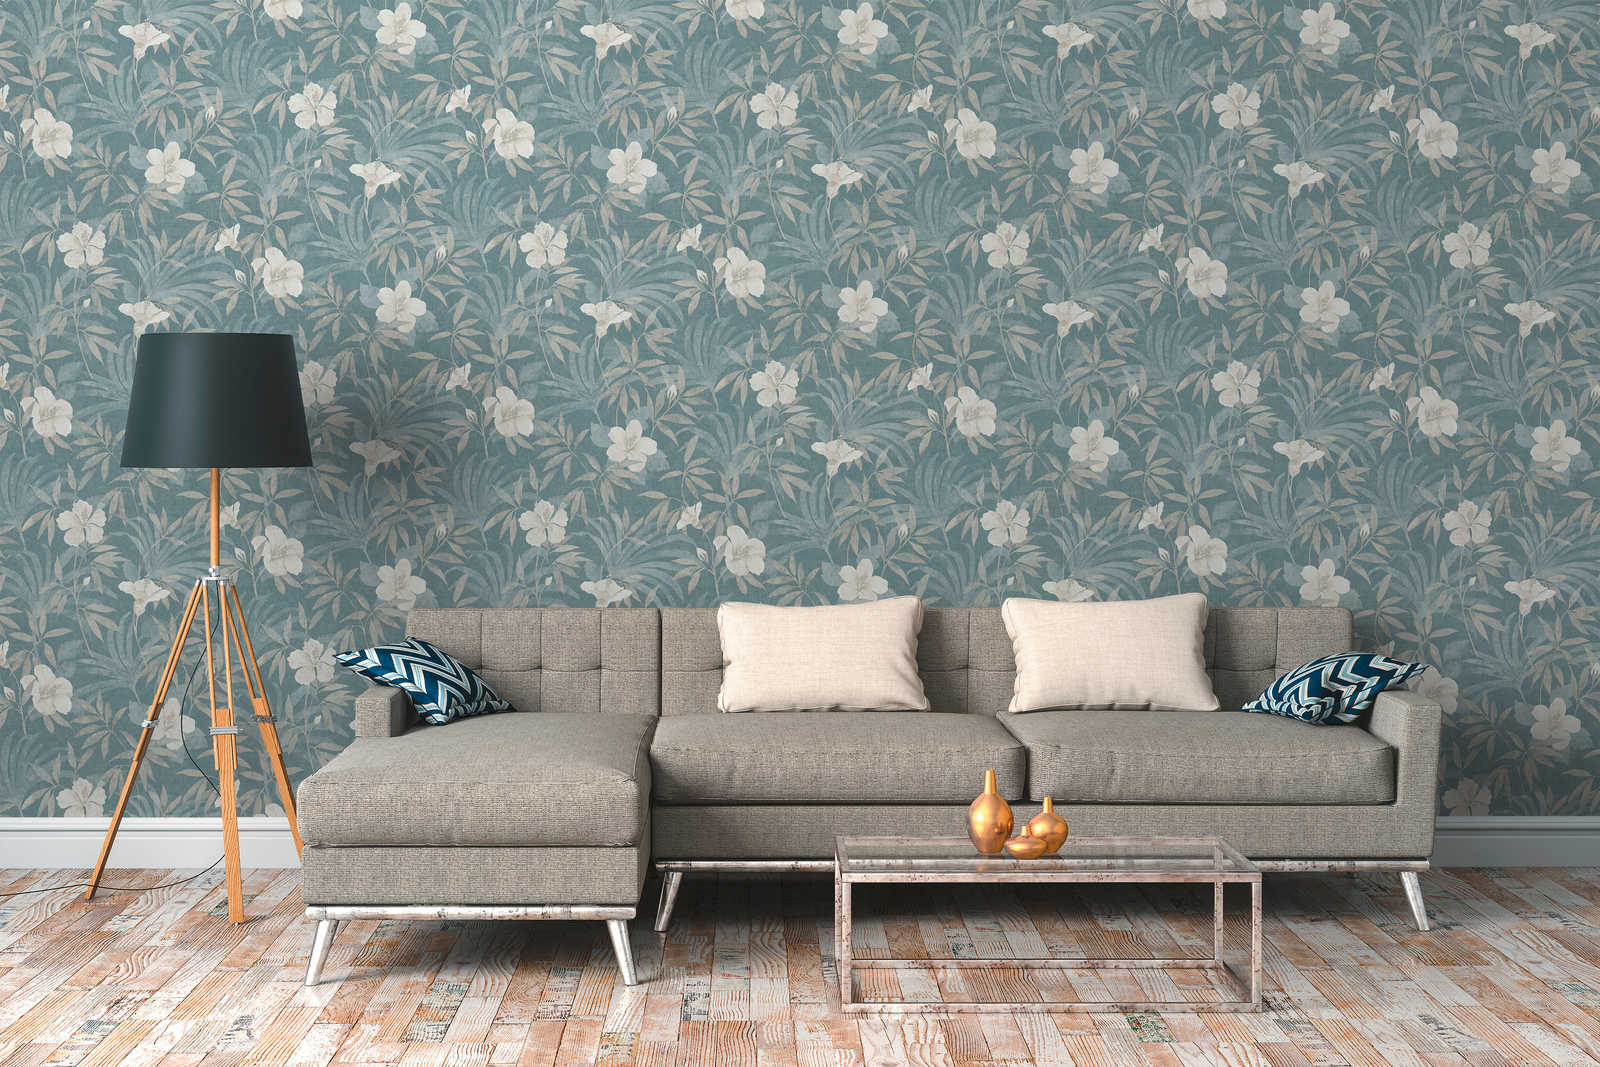             Wallpaper petrol jungle pattern with hibiscus flowers - beige, blue
        